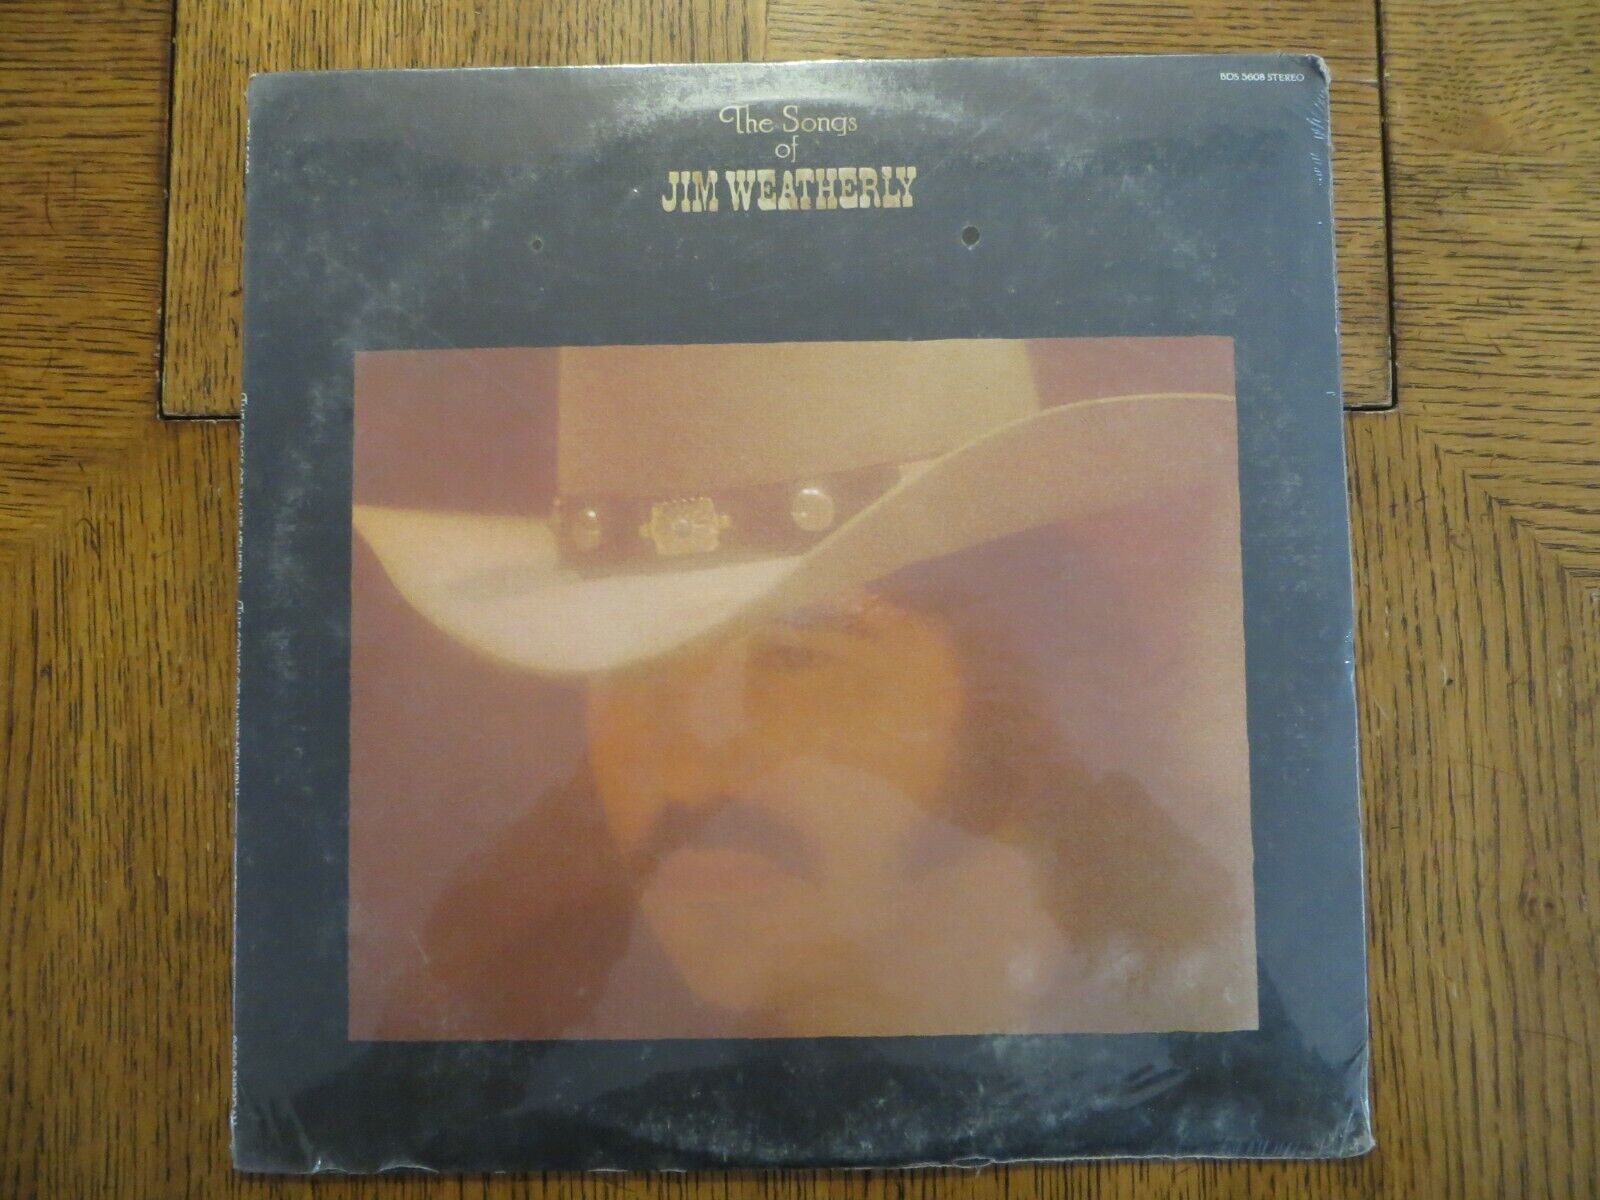 The Songs Of Jim Weatherly - 1974 - Buddah Records BDS 5608 Vinyl LP NEW SEALED